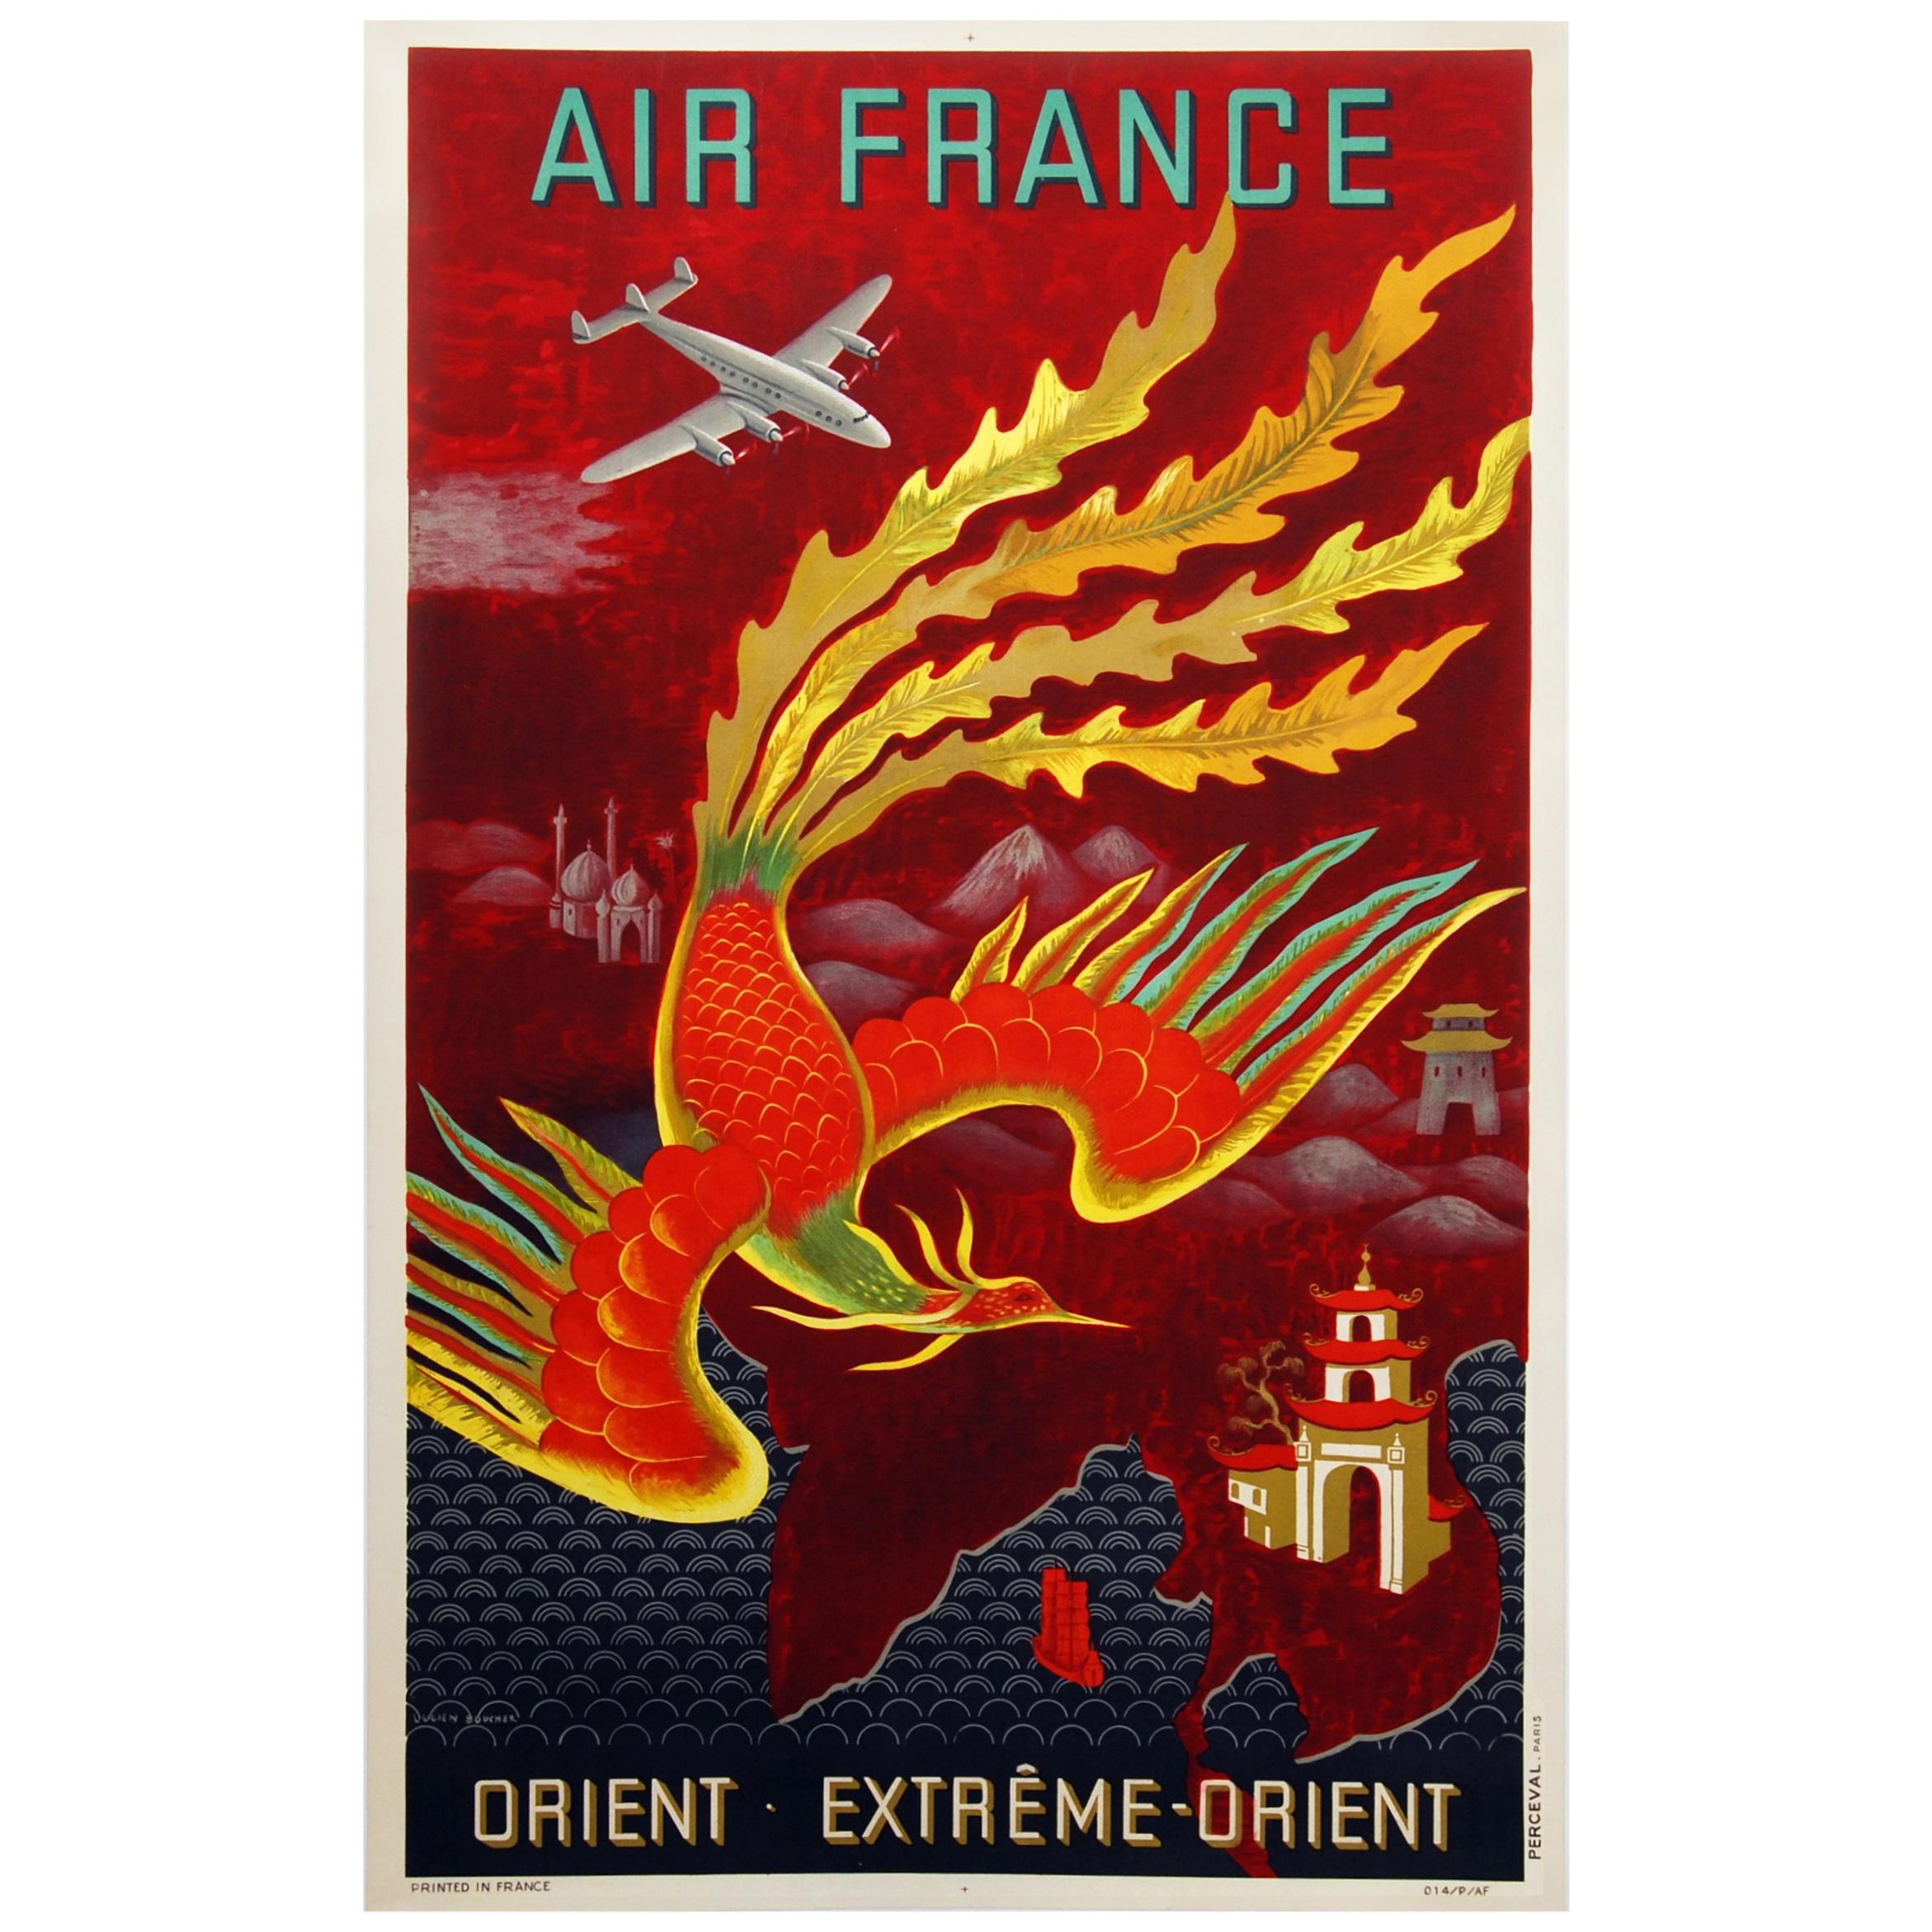 Air France Poster for the Orient Extreme-Orient by Lucien Bouch, 1947